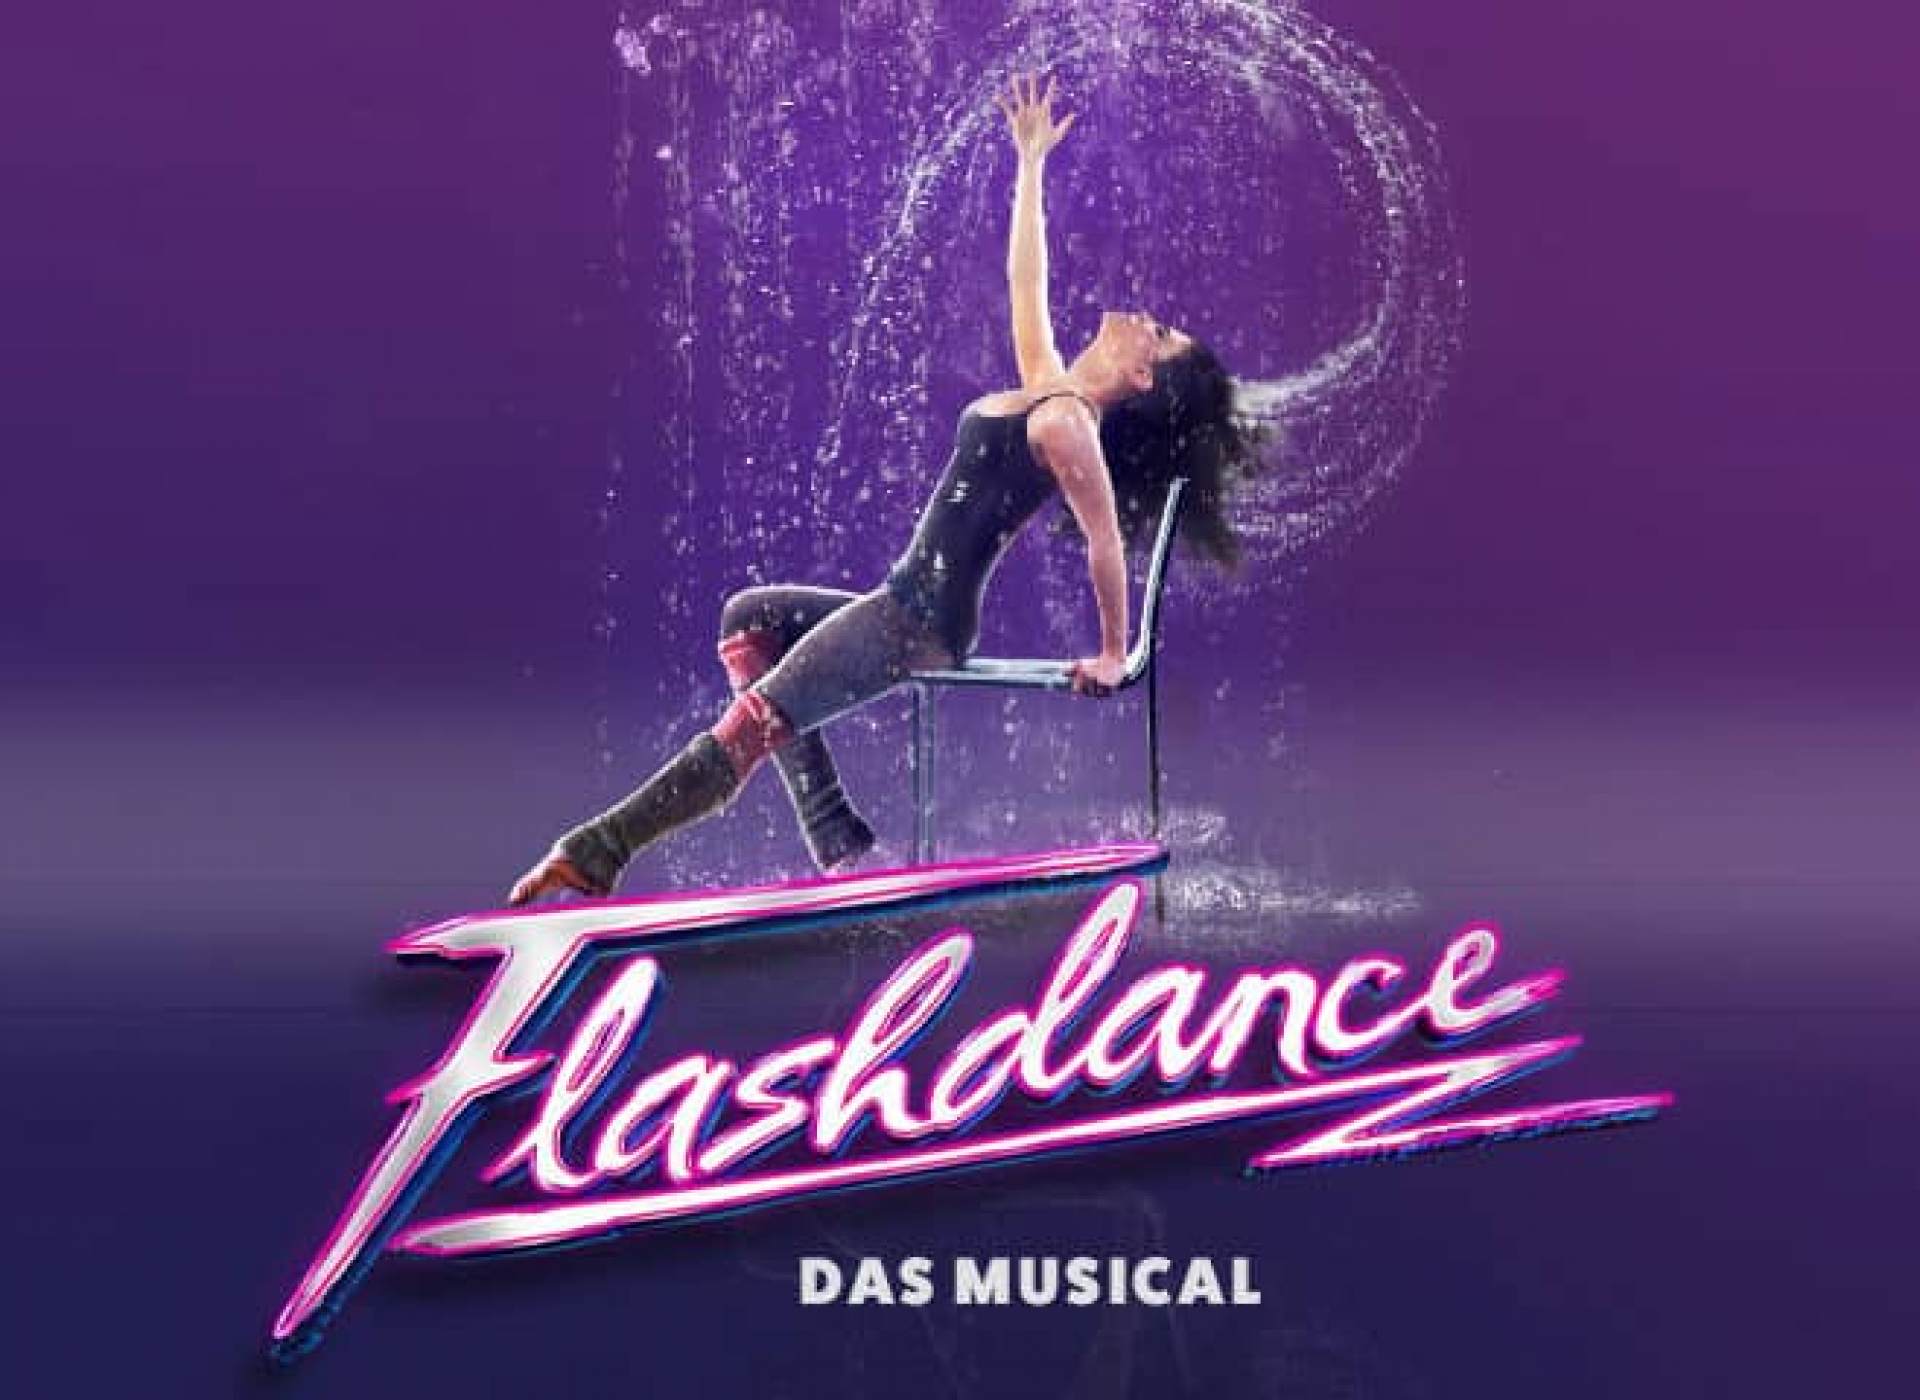 Flashdance - What A Feeling - The Musical